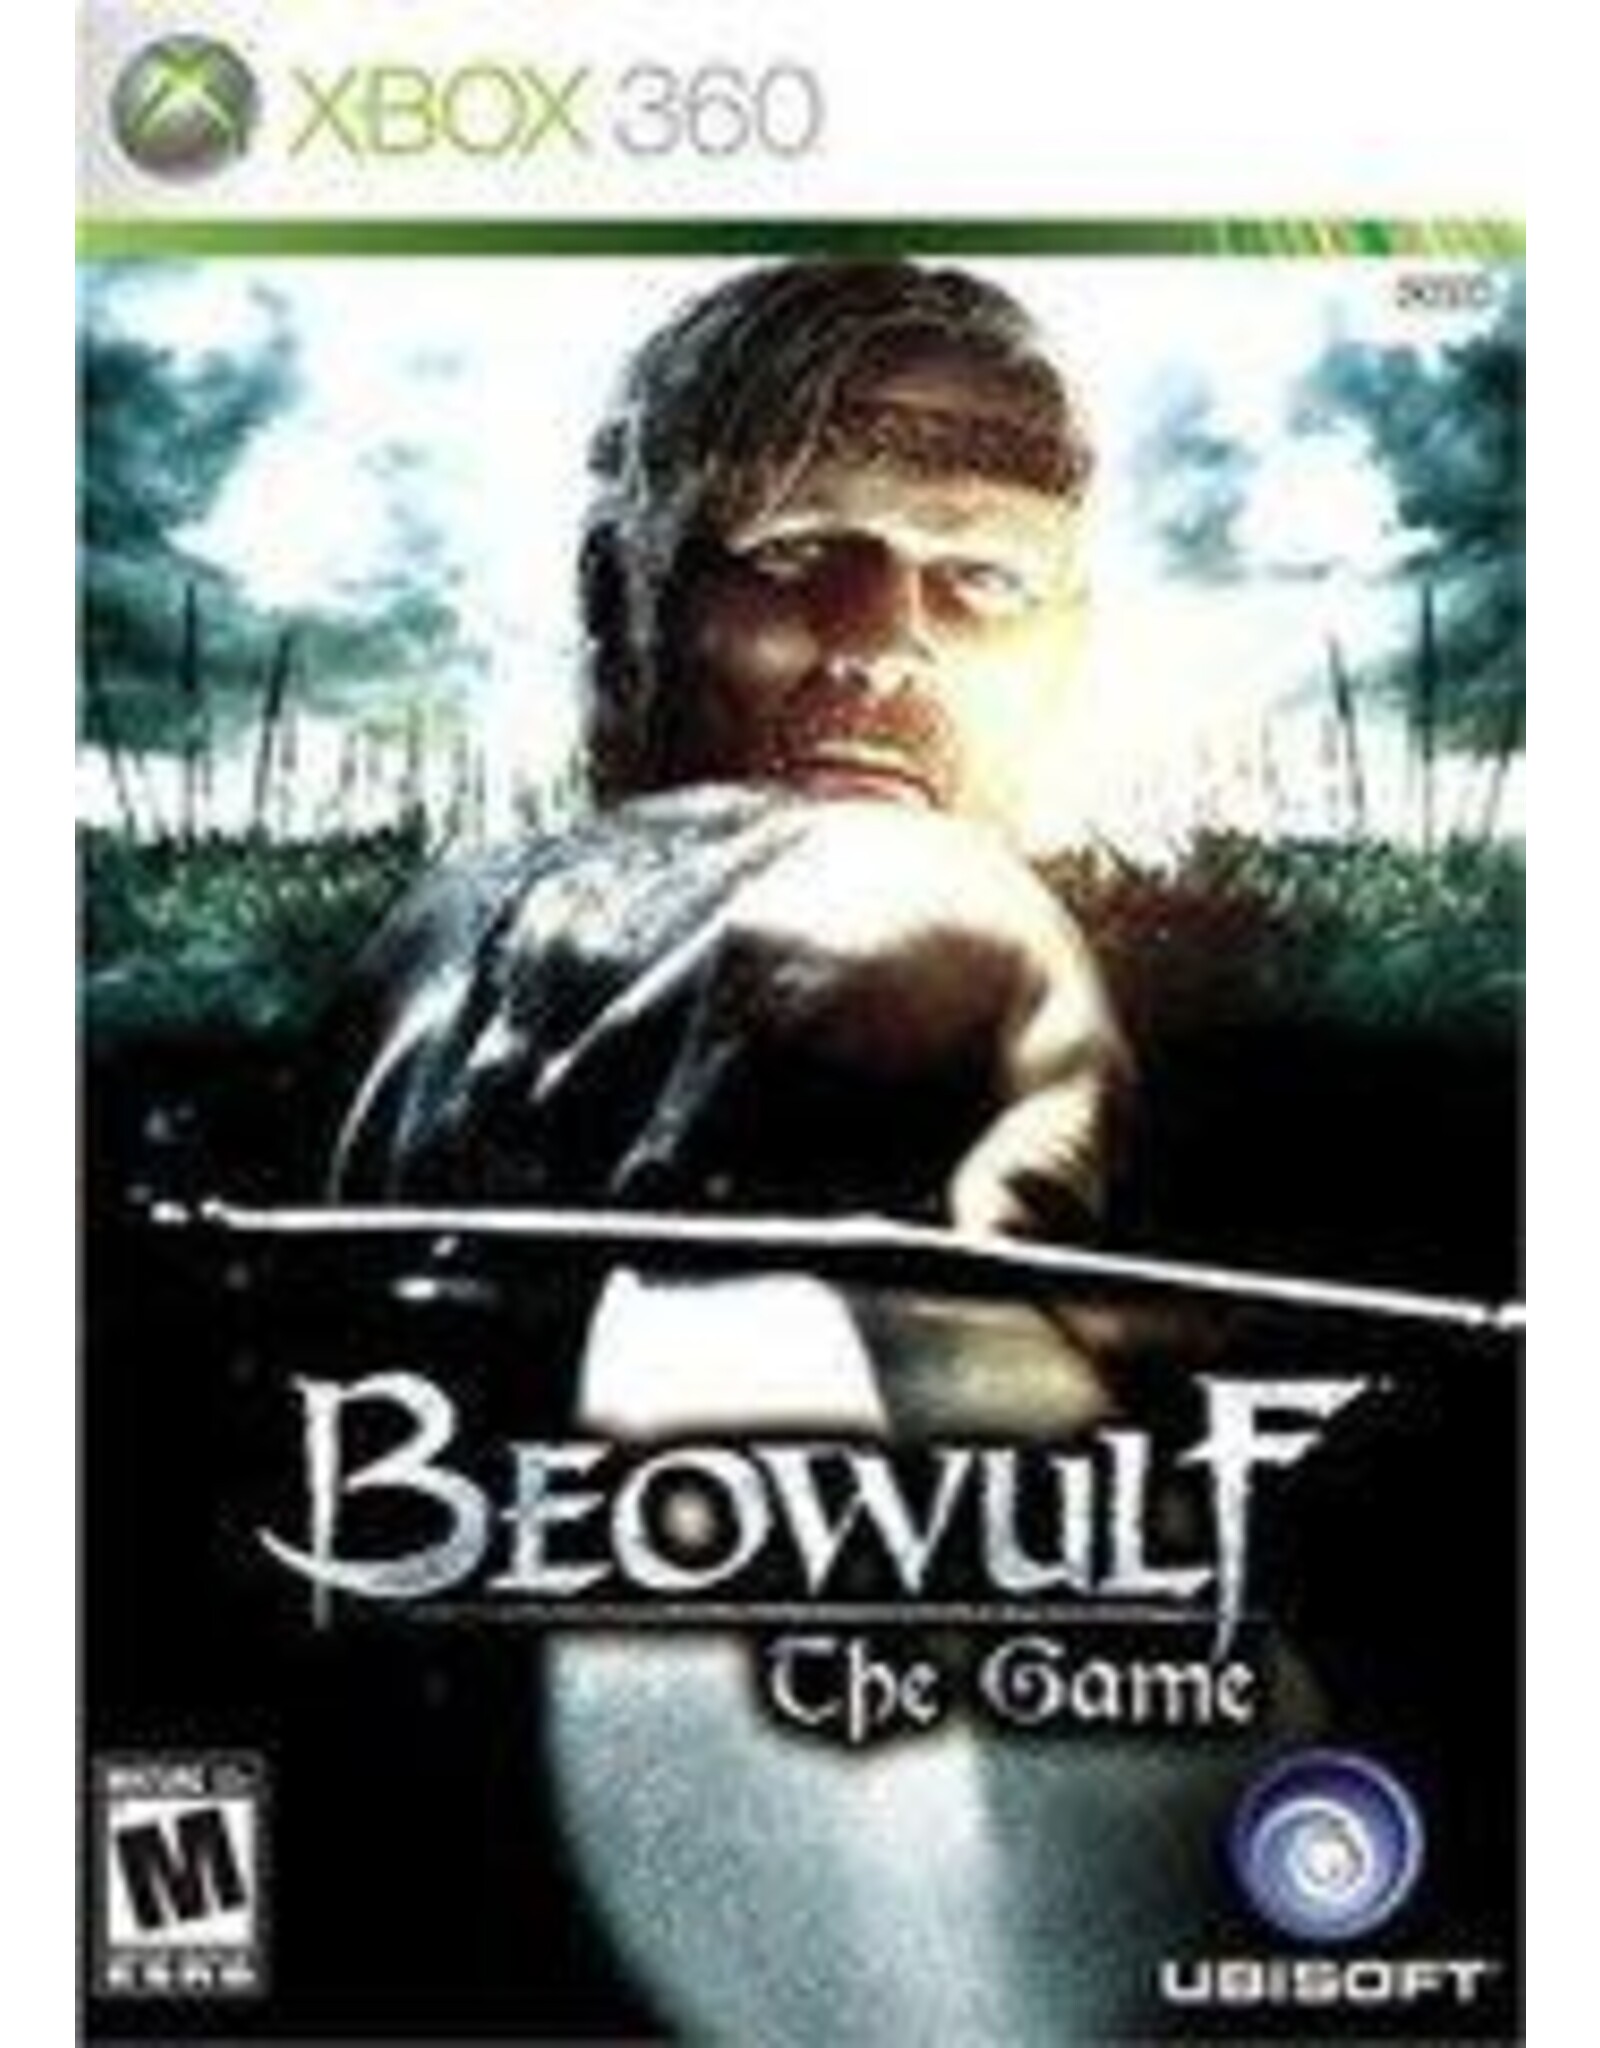 Xbox 360 Beowulf The Game (CiB, Sticker on Jacket)